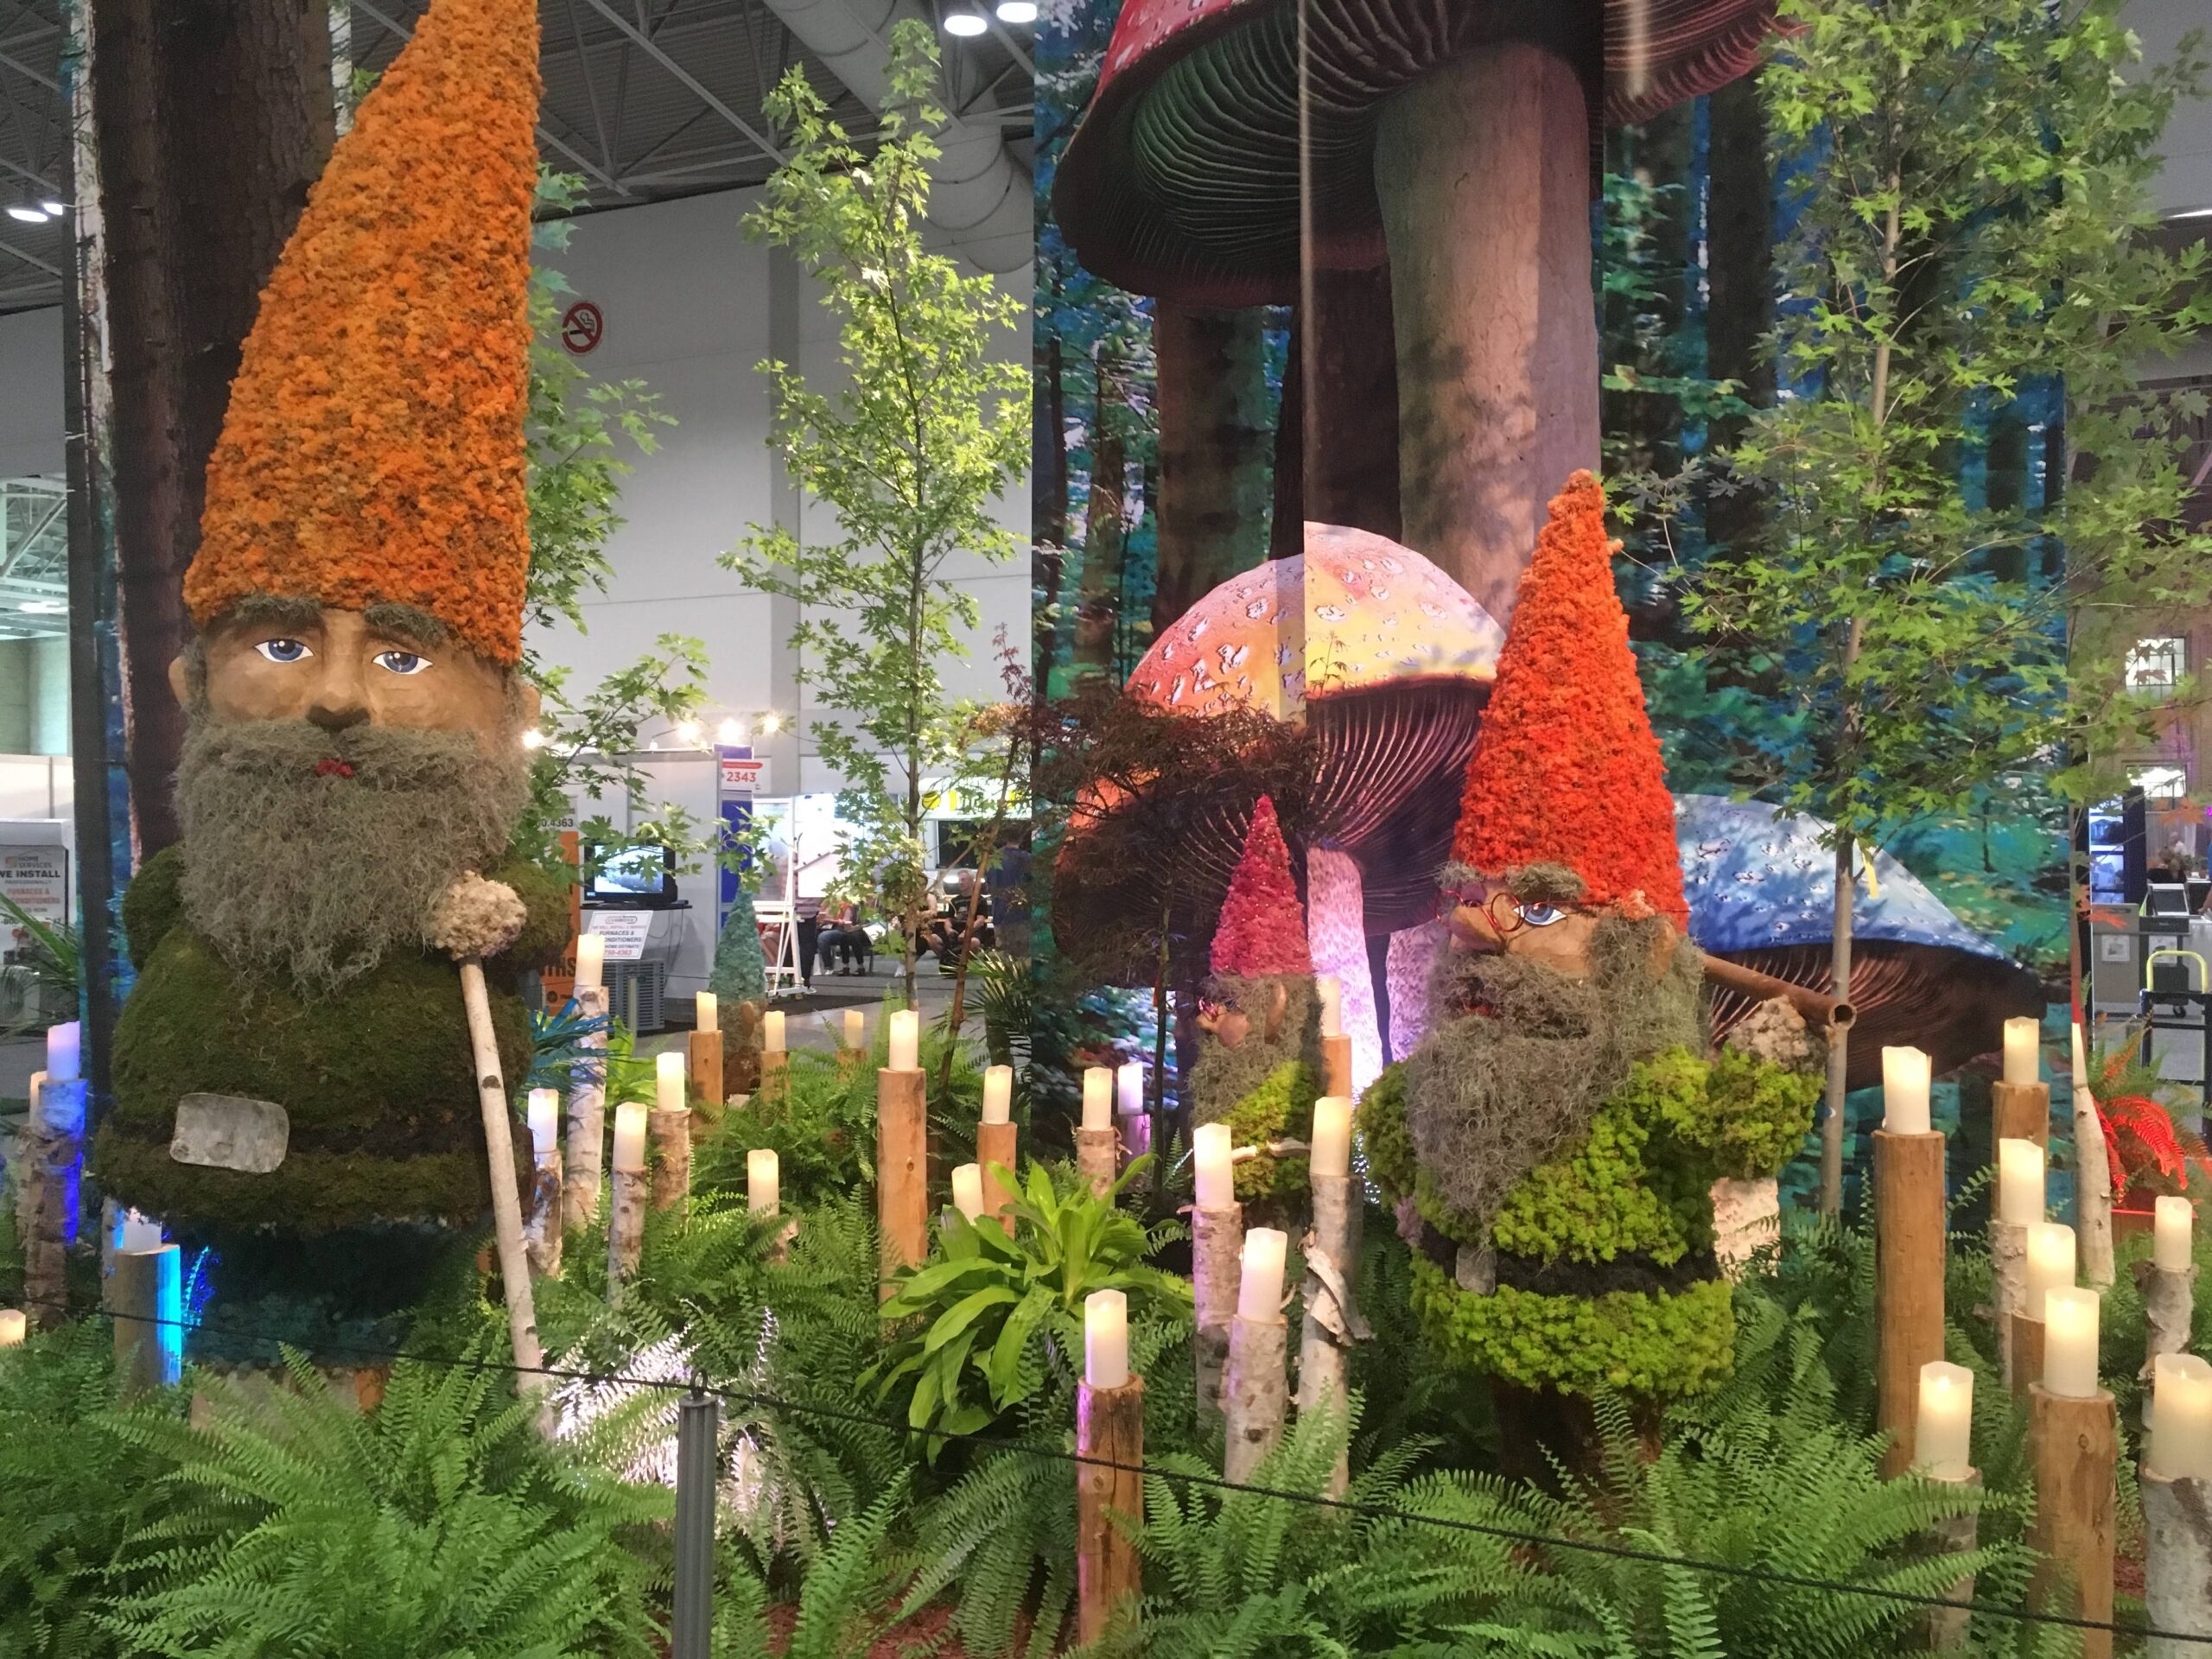 Nook of Gnomes Exhibit. Located in Heritage Court, a colouful display of gnomes and large scale woodland items are places at the entrance of the hall.